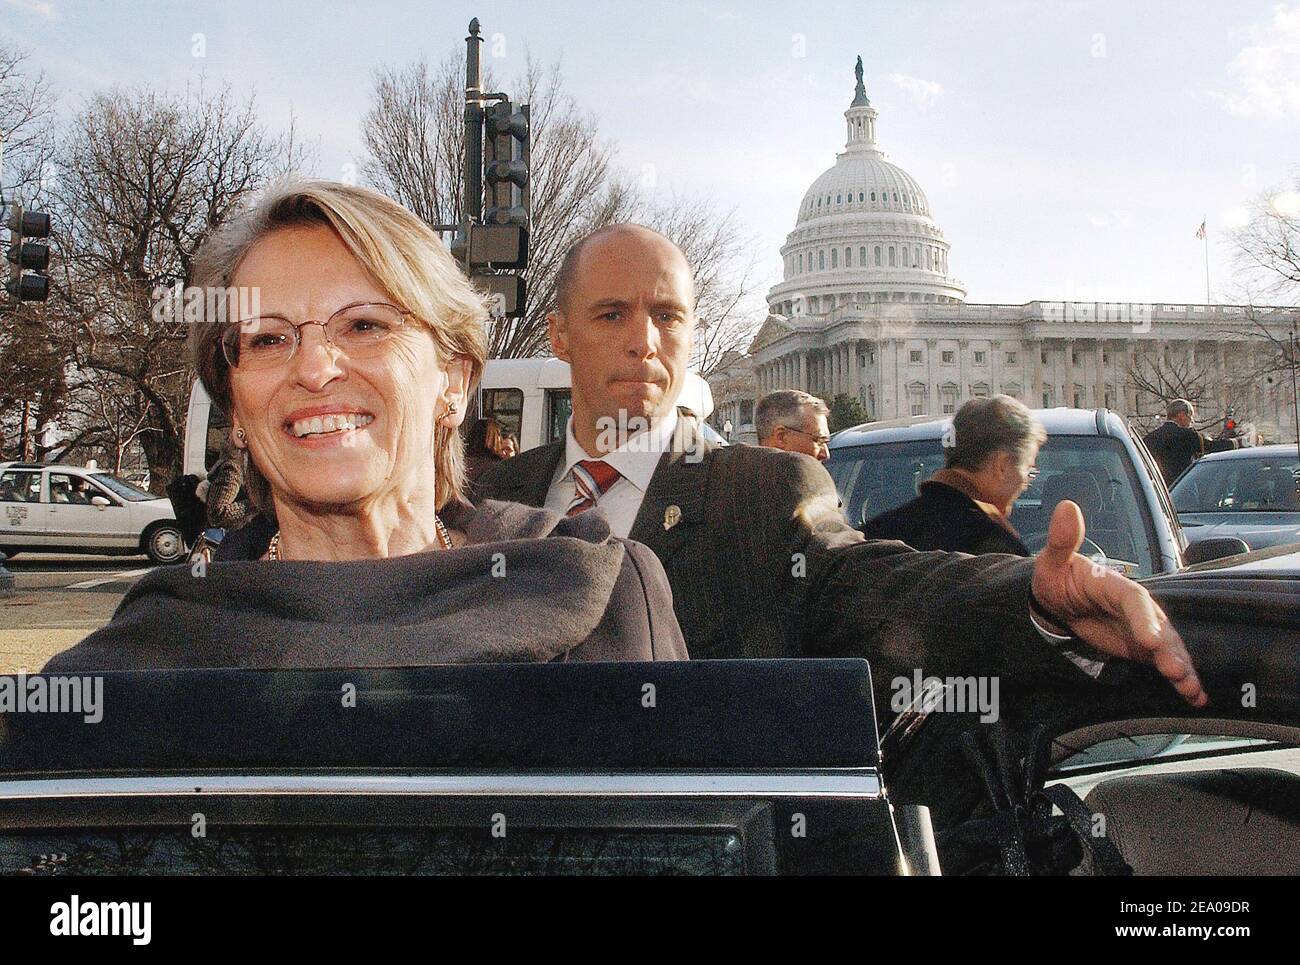 French Defence Minister Michele Alliot-Marie arrives on Capitol Hill in Washington DC, USA, on March 10, 2005, to meet with U.S. Senator John Warner. Photo by Olivier Douliery/ABACA. Stock Photo